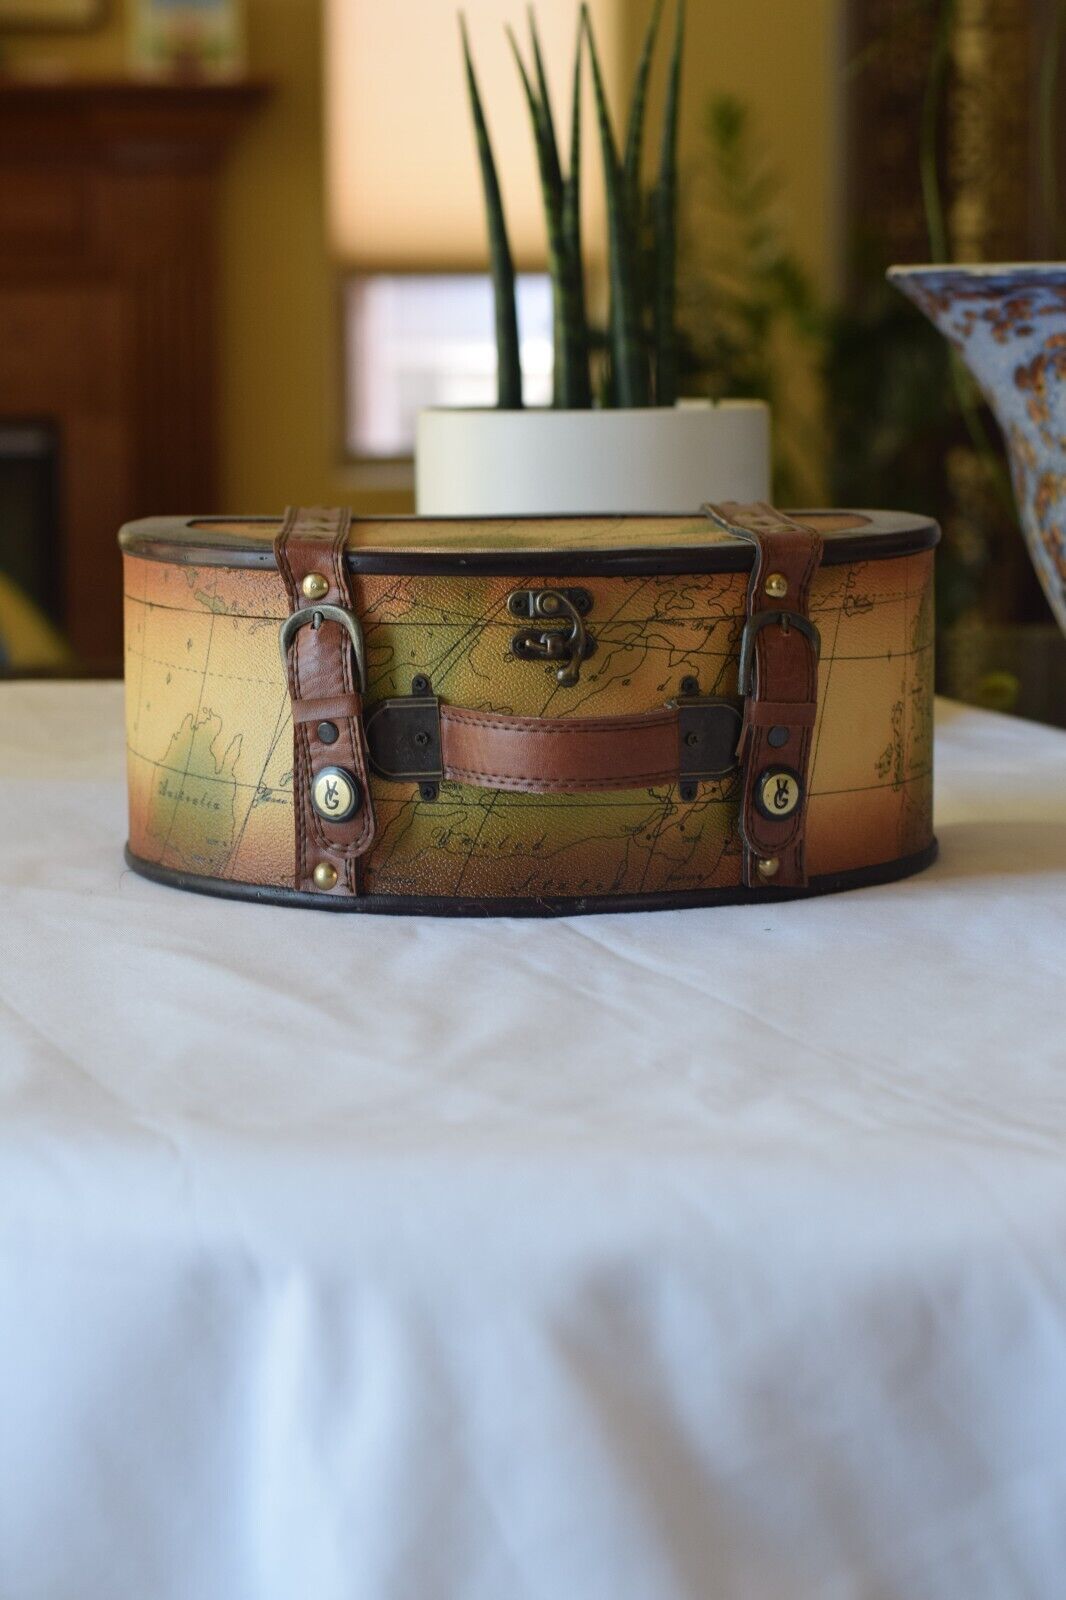 Vintage Half-Moon-Shaped Carrying Case Printed with Map with Latch and Handle